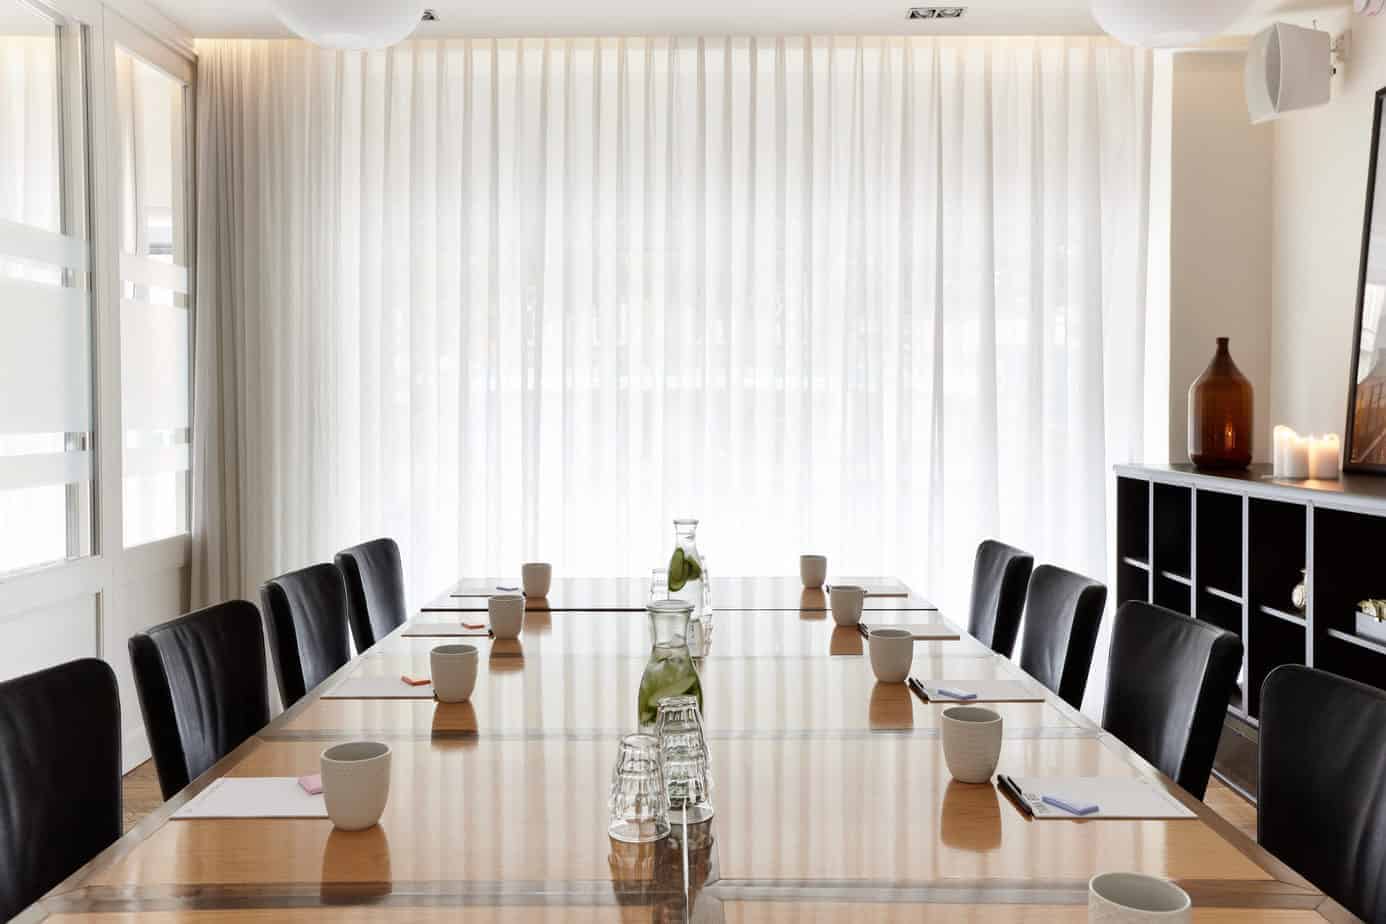 Small classic boardroom for intimate meetings